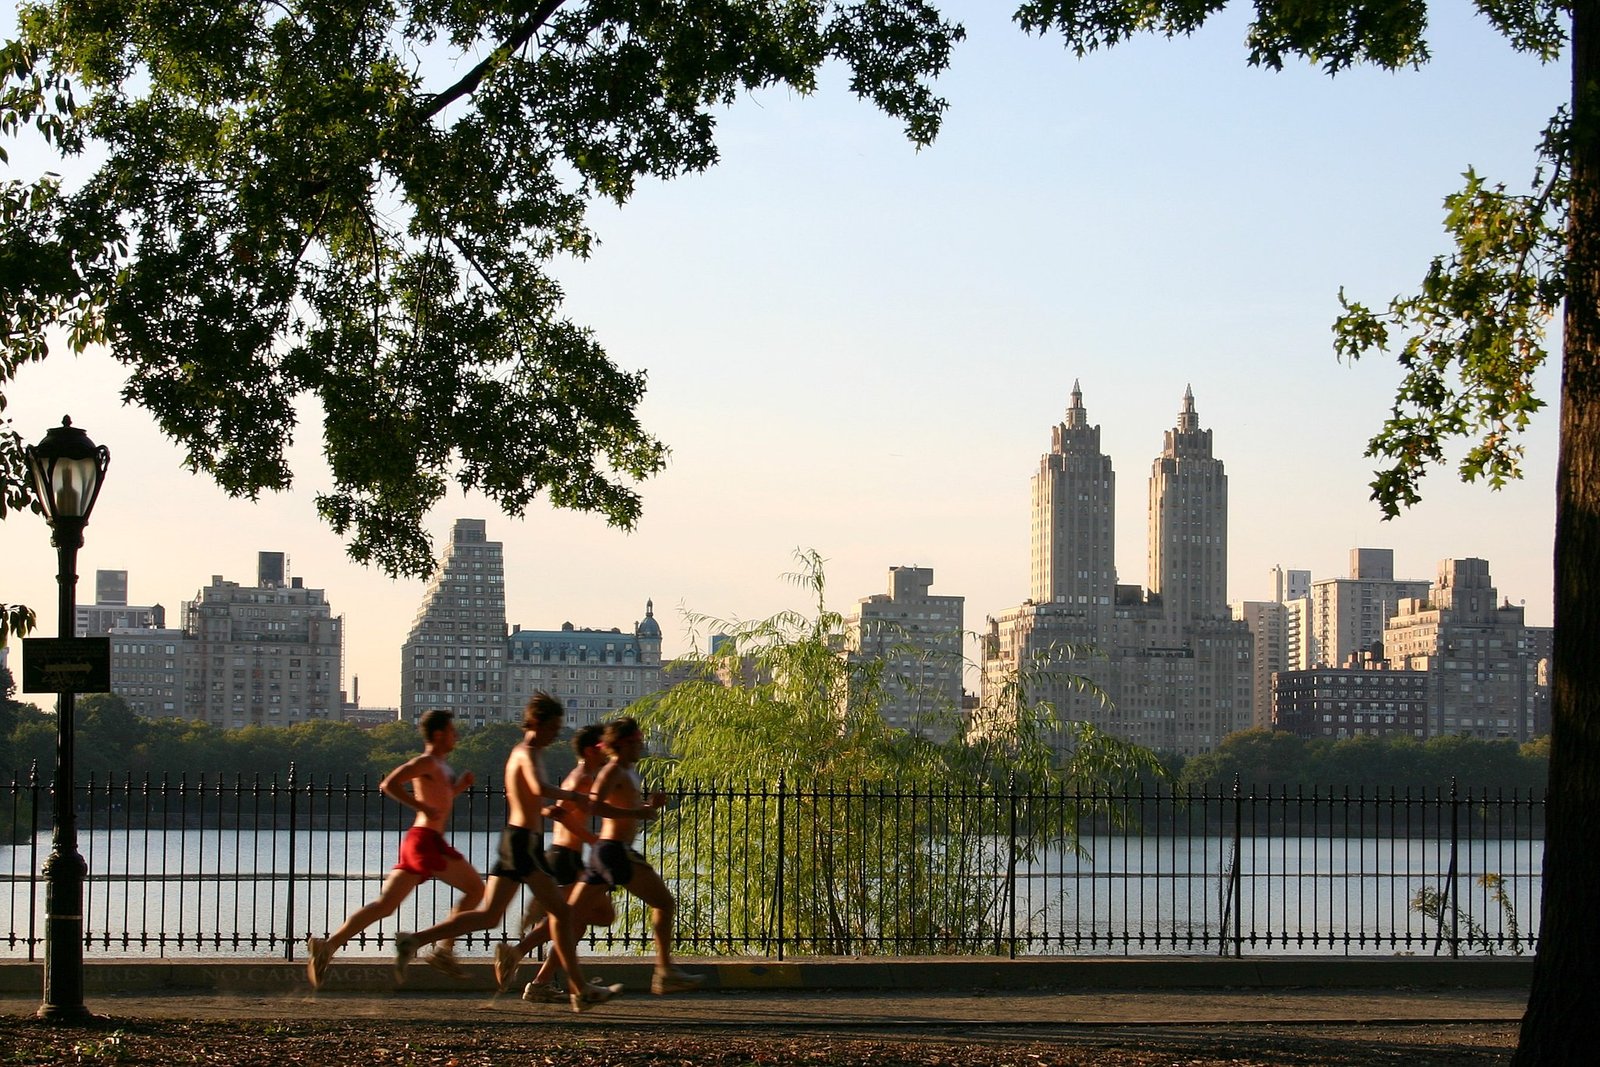 Runners jogging through Central Park in New York City.